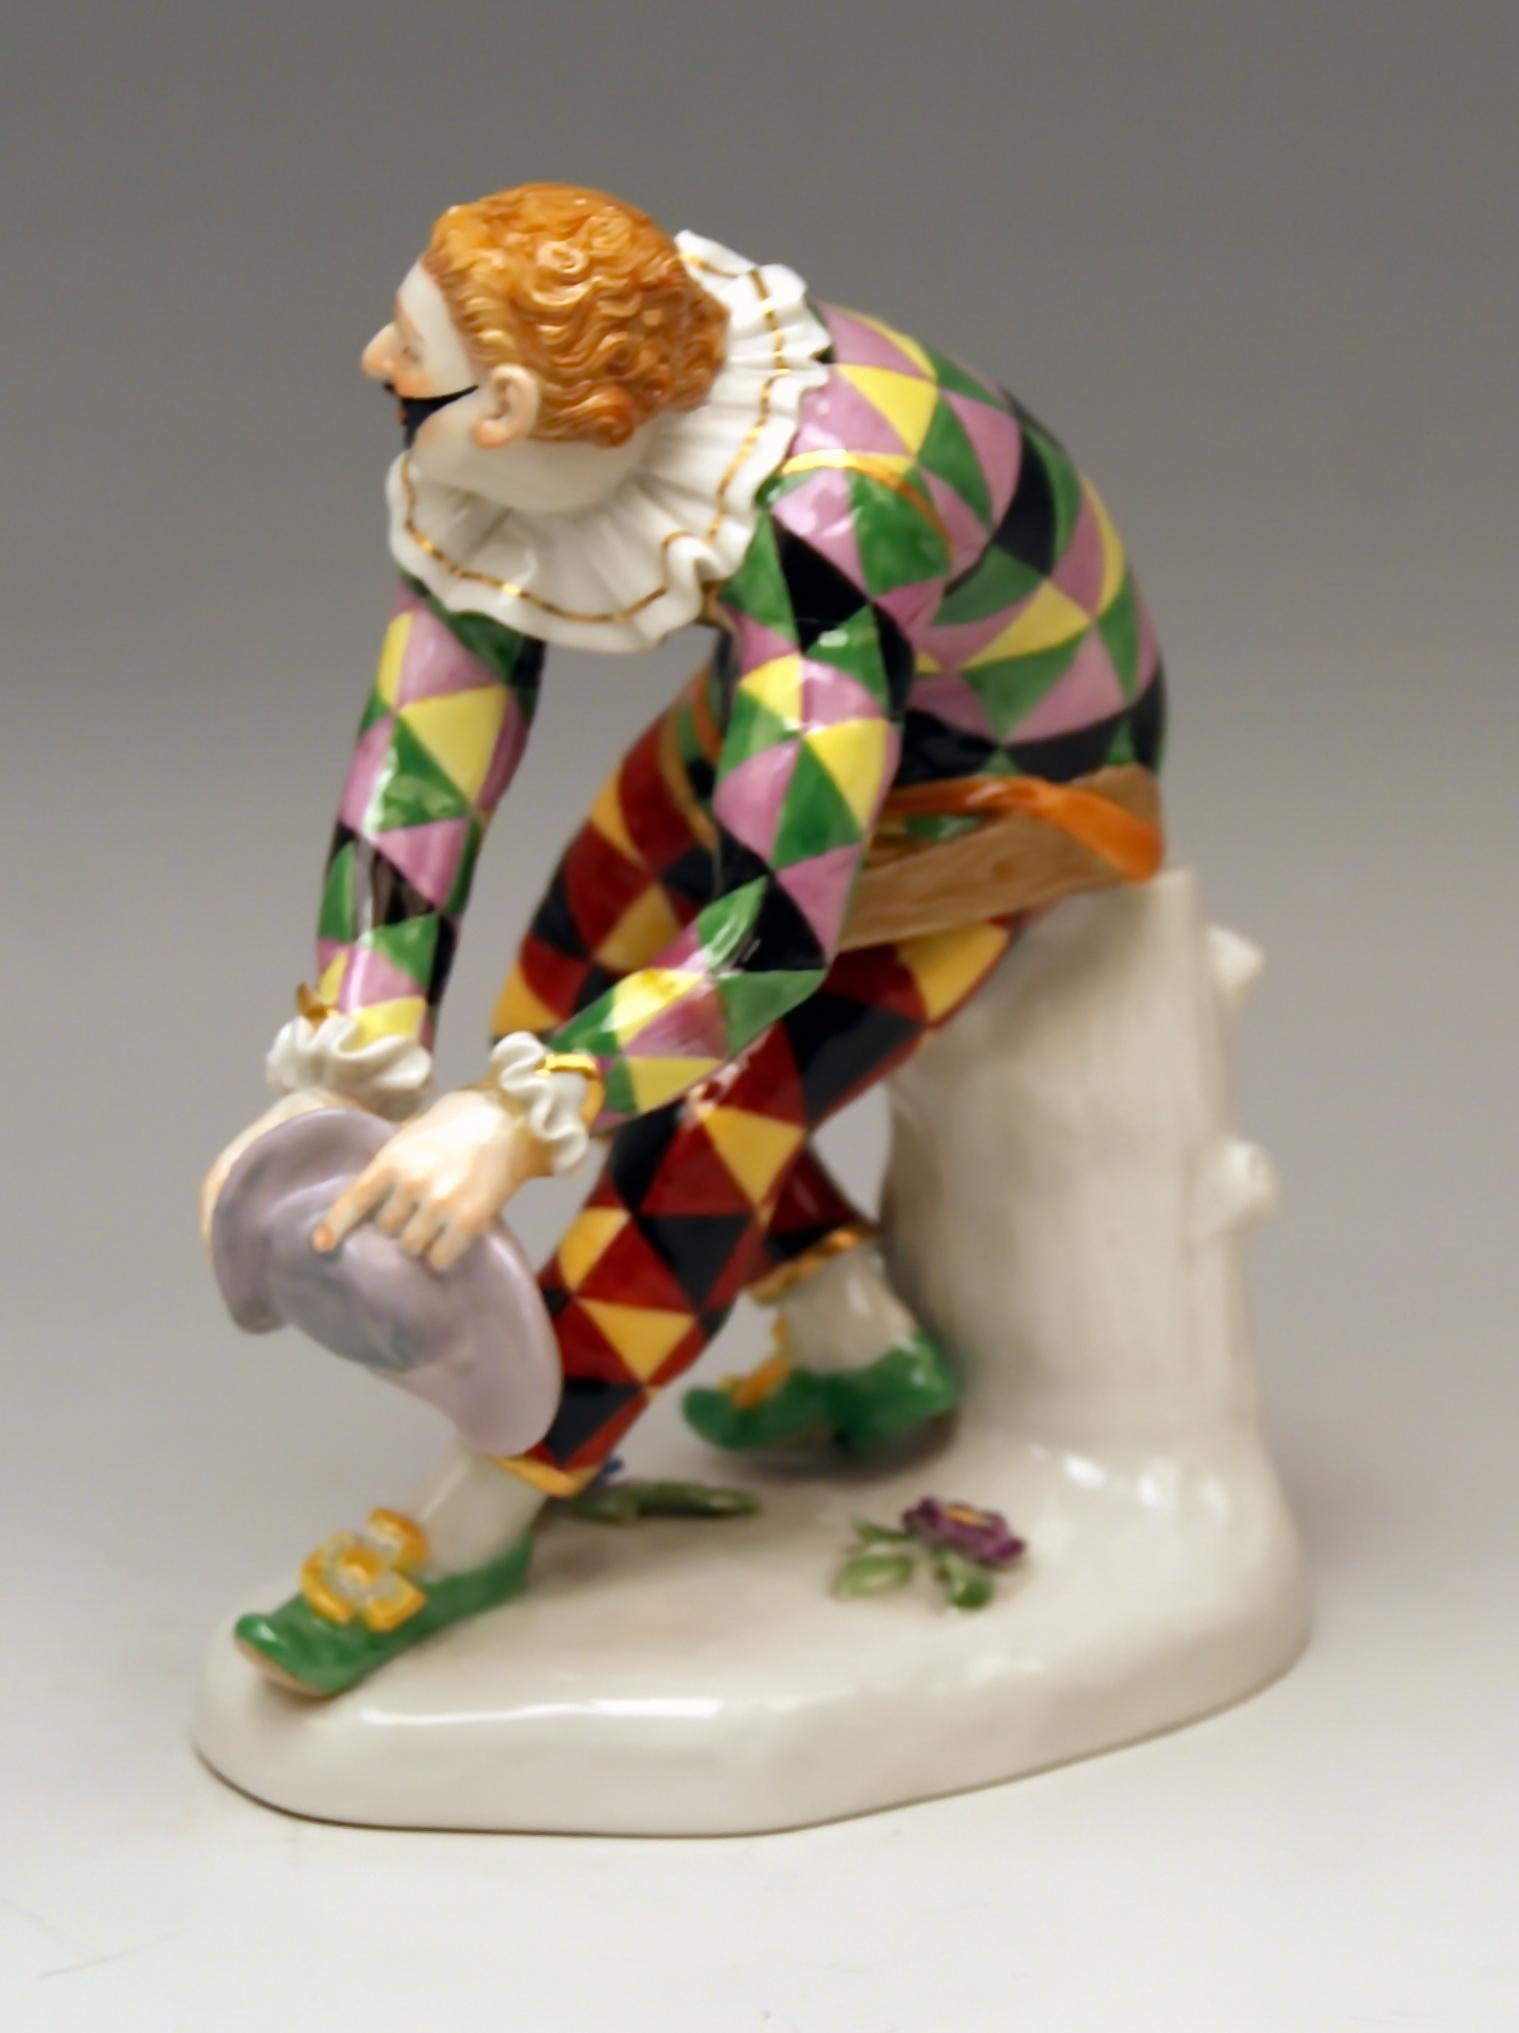 Meissen most lovely Greeting Harlequin 
model 632 / 64529
made second half of 20th century

Size:
height: 6.29 inches (= 16.0 cm)
length of base: 4.99 inches (= 12.7 cm)
depth of base: 3.03 inches (= 7.7 cm)

Manufactory: